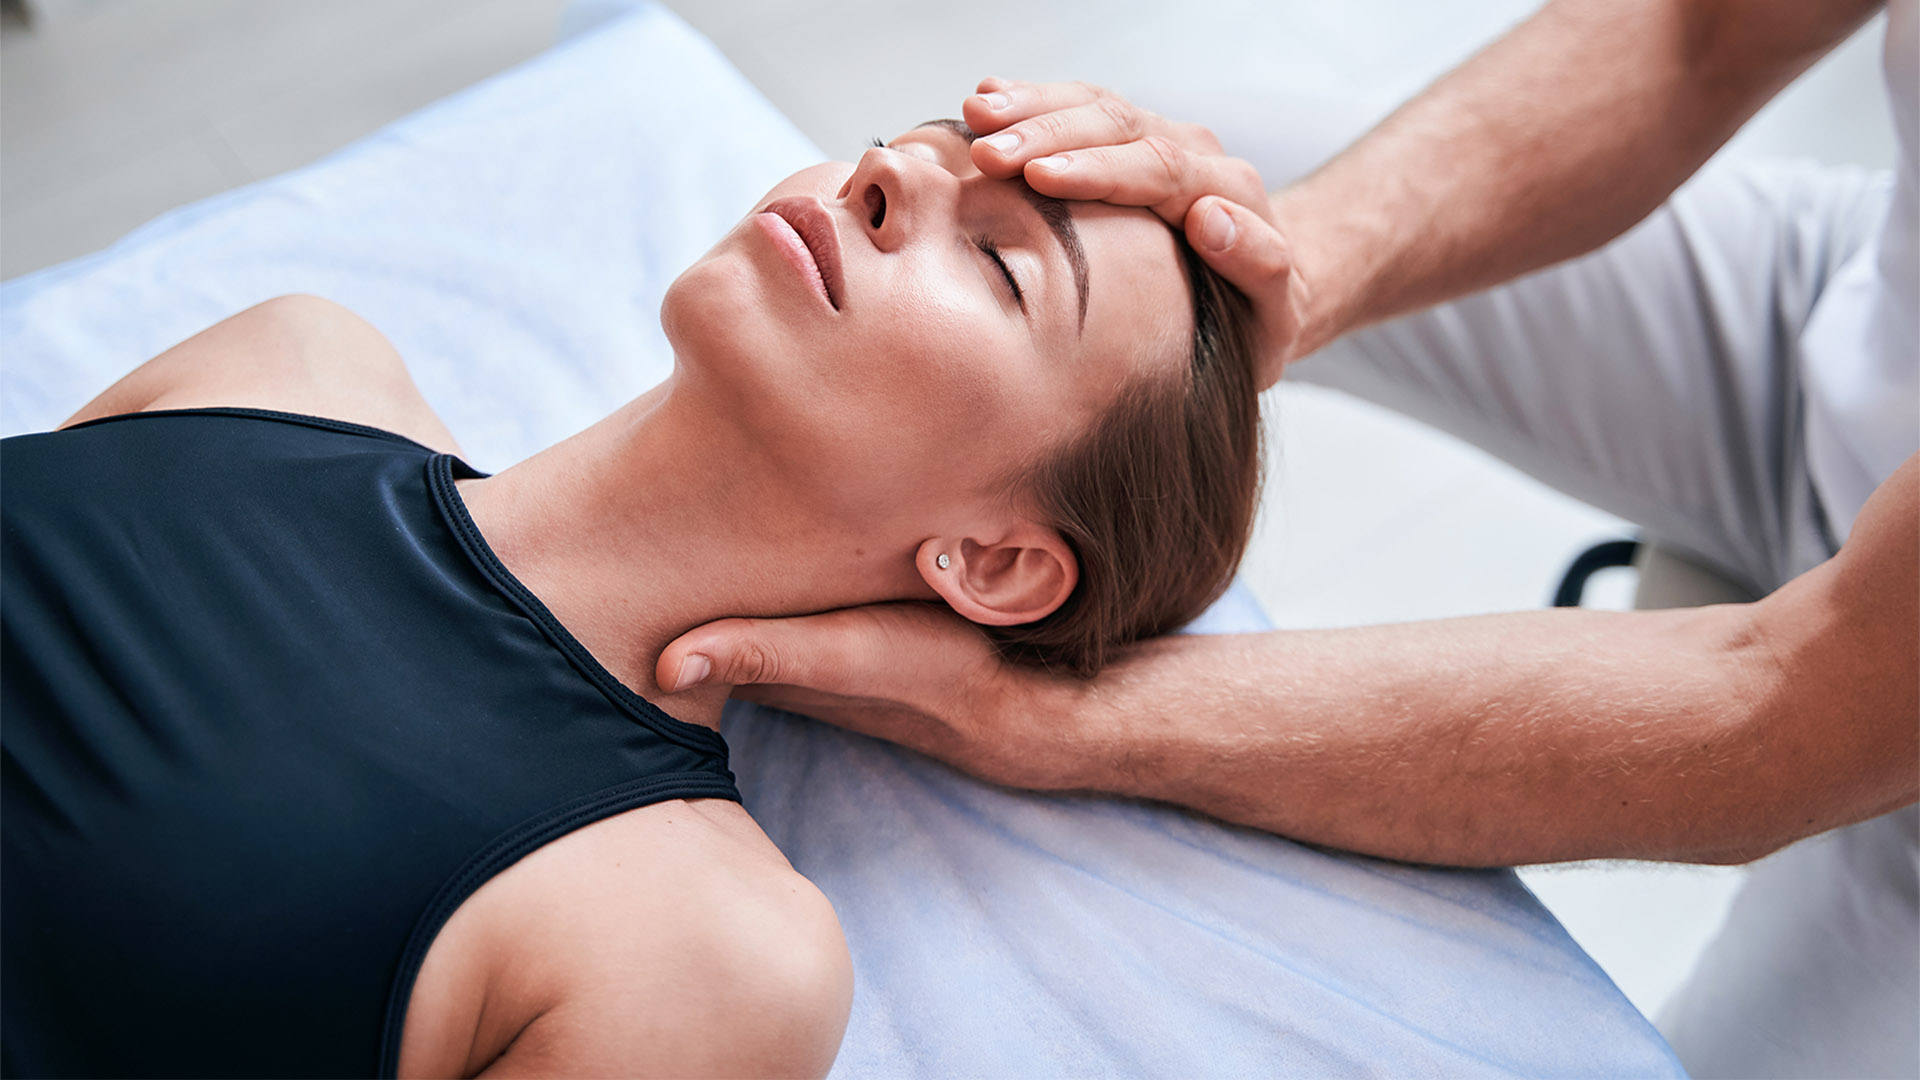 Do Physiotherapists Perform Massage Therapy?